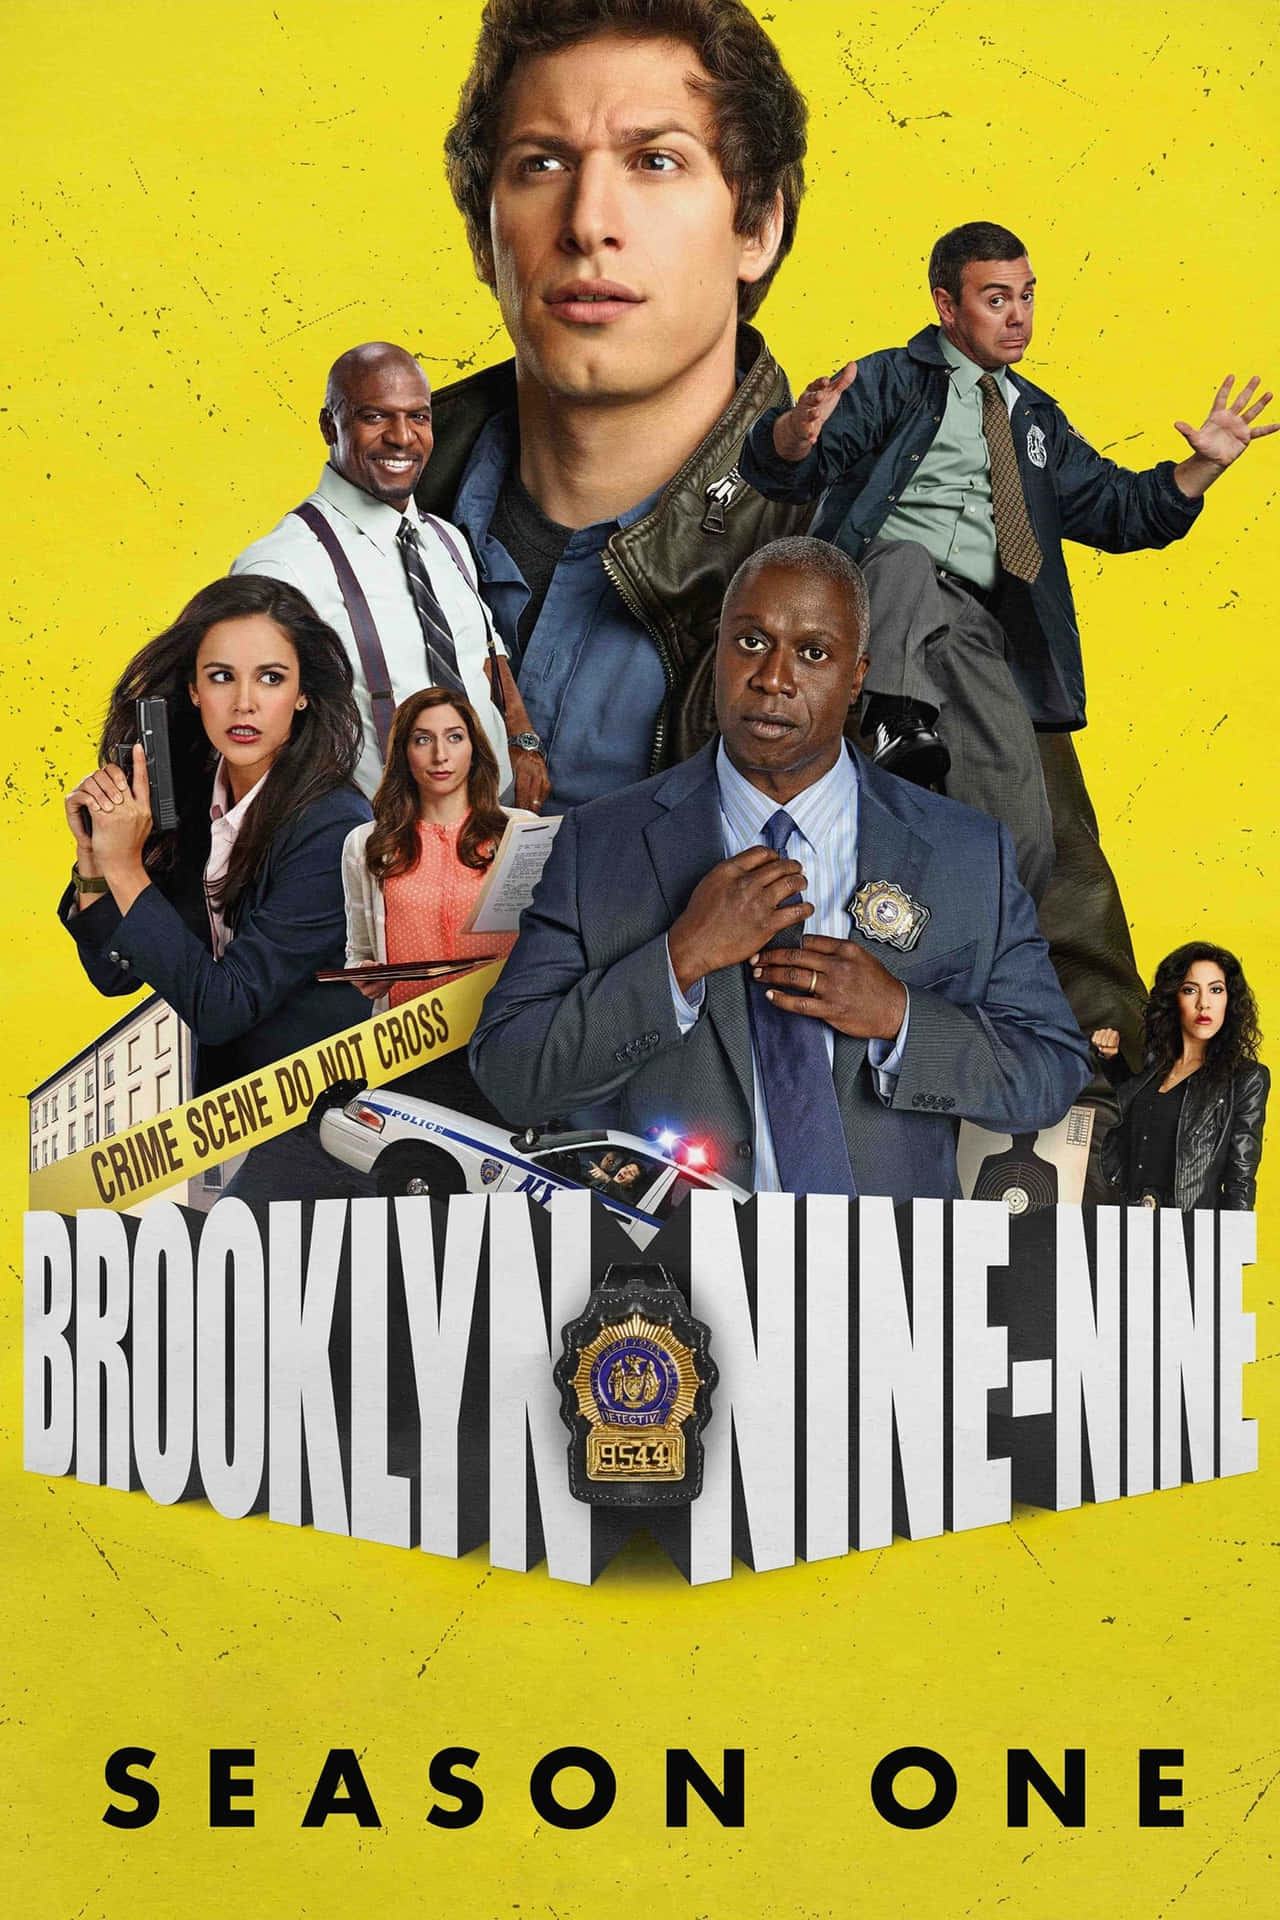 Catch a laugh and a crime with Brooklyn Nine Nine